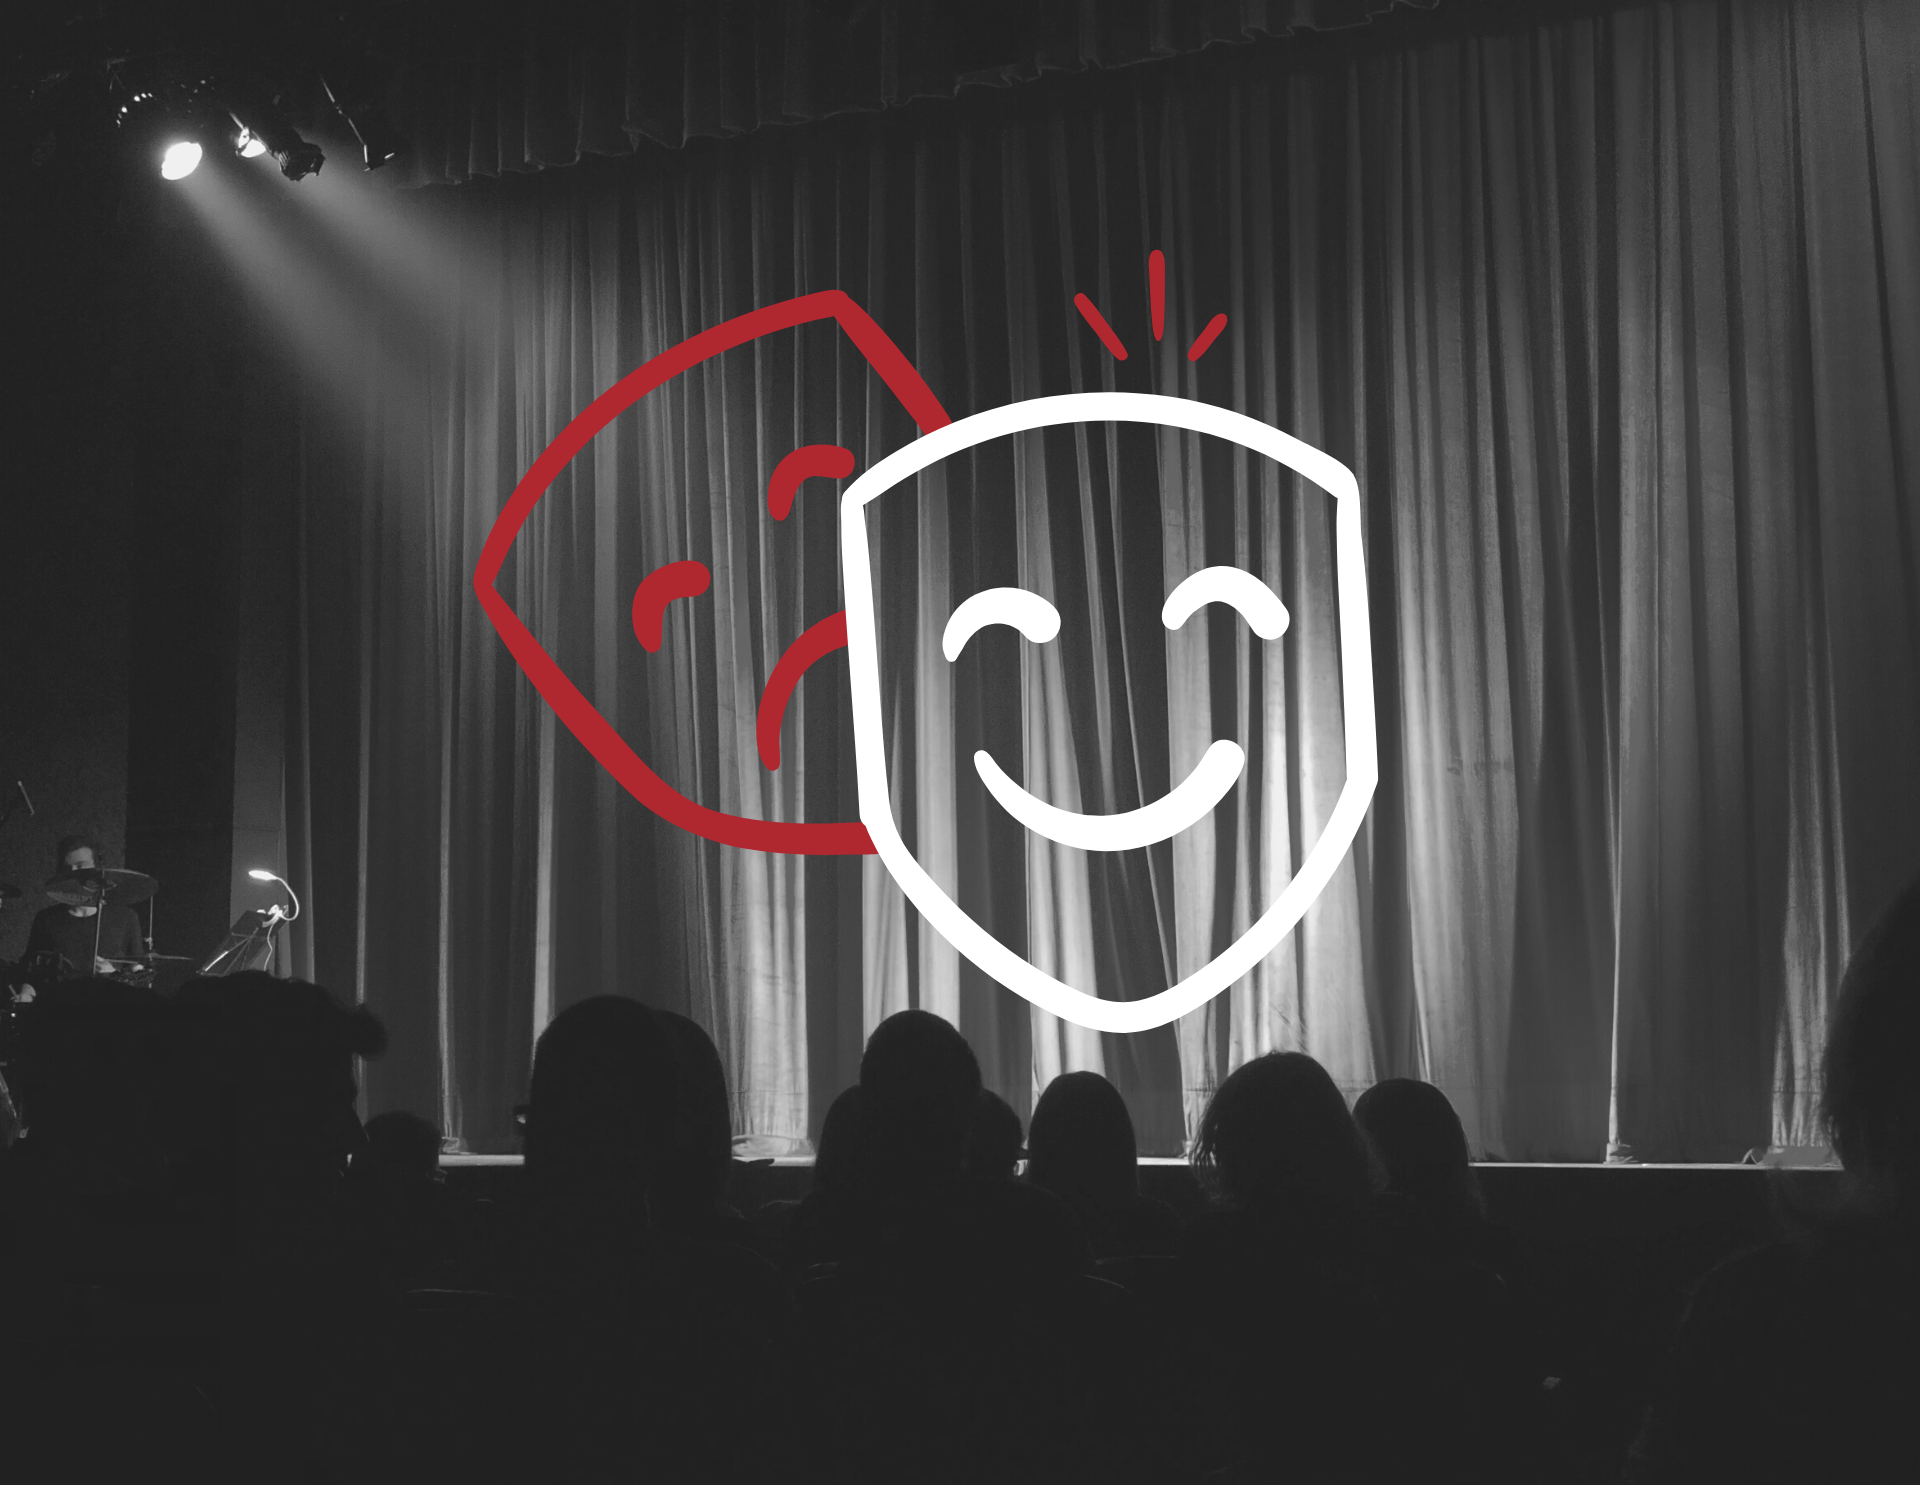 Black and white background of theatre stage and curtain. Red and white theatre mask in middle of photo.